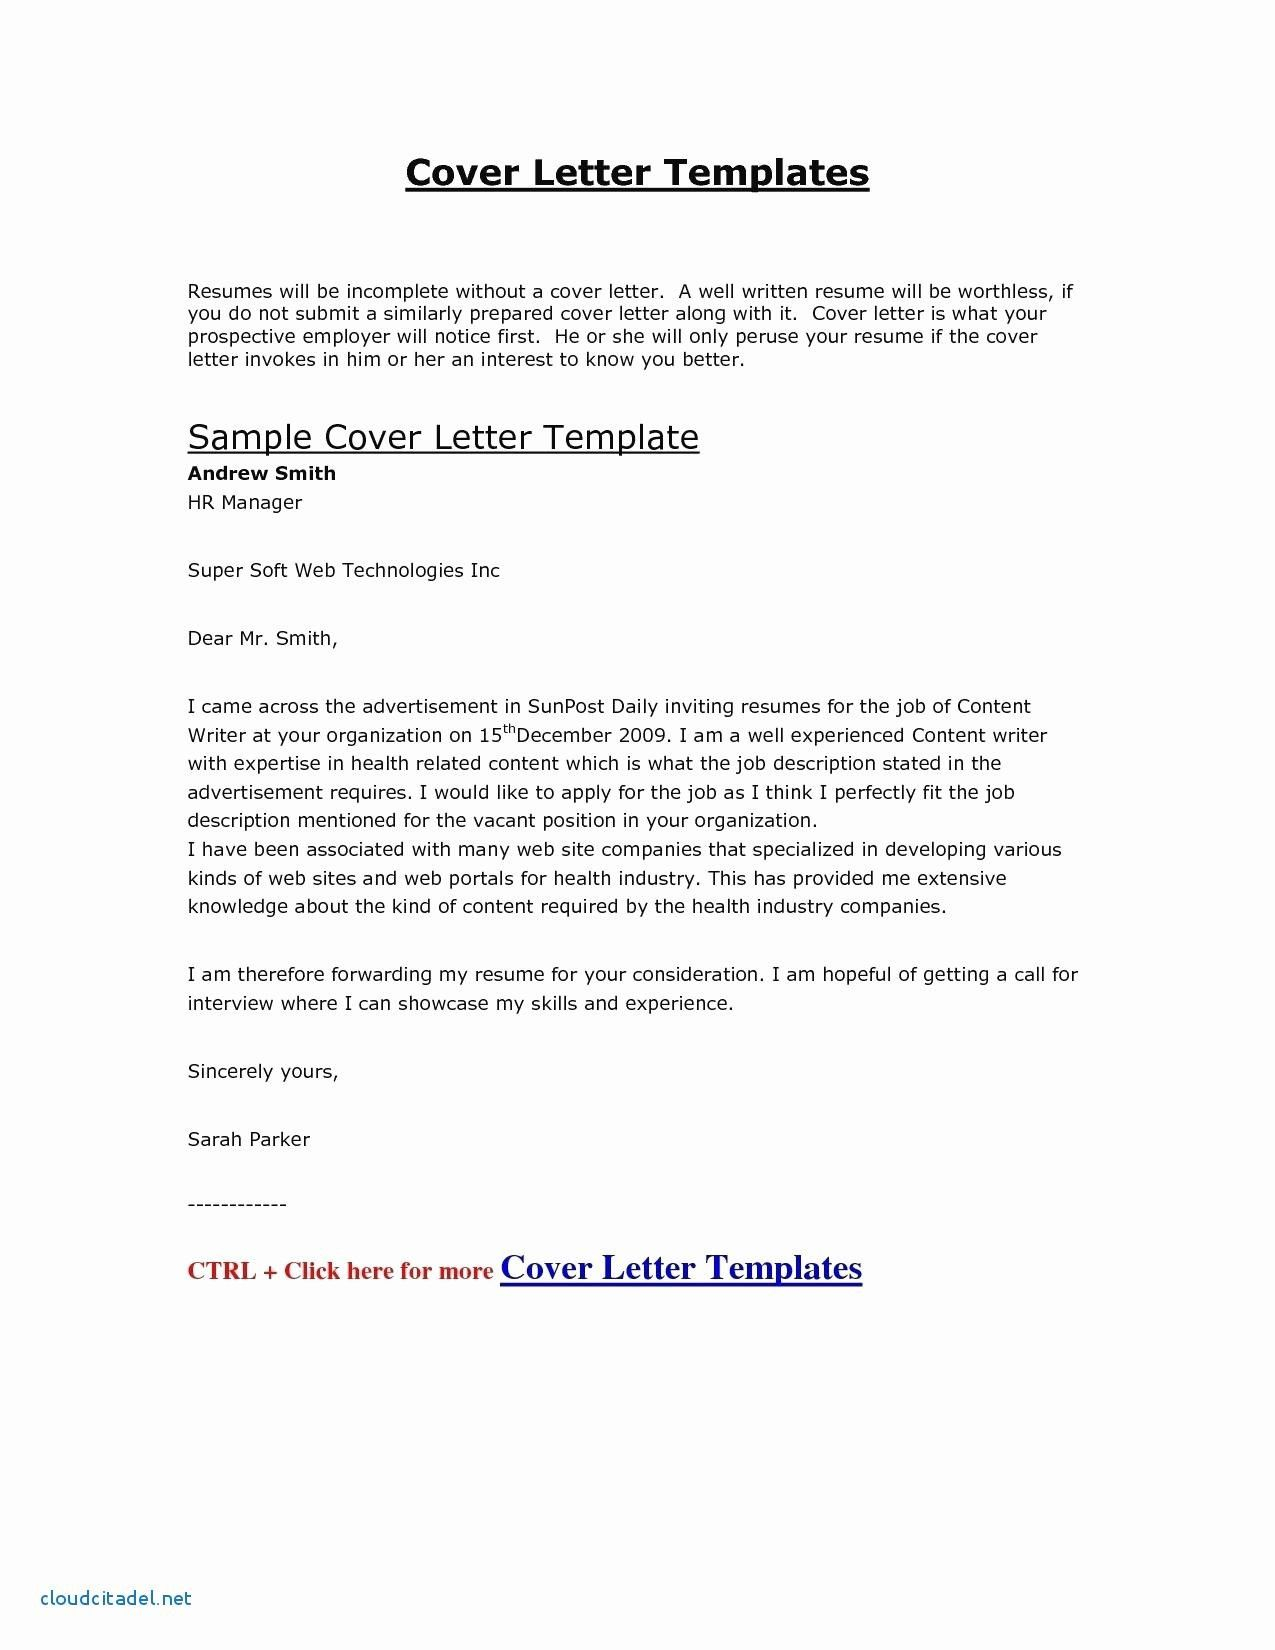 Good Cover Letter Openings Enom for sizing 1275 X 1650